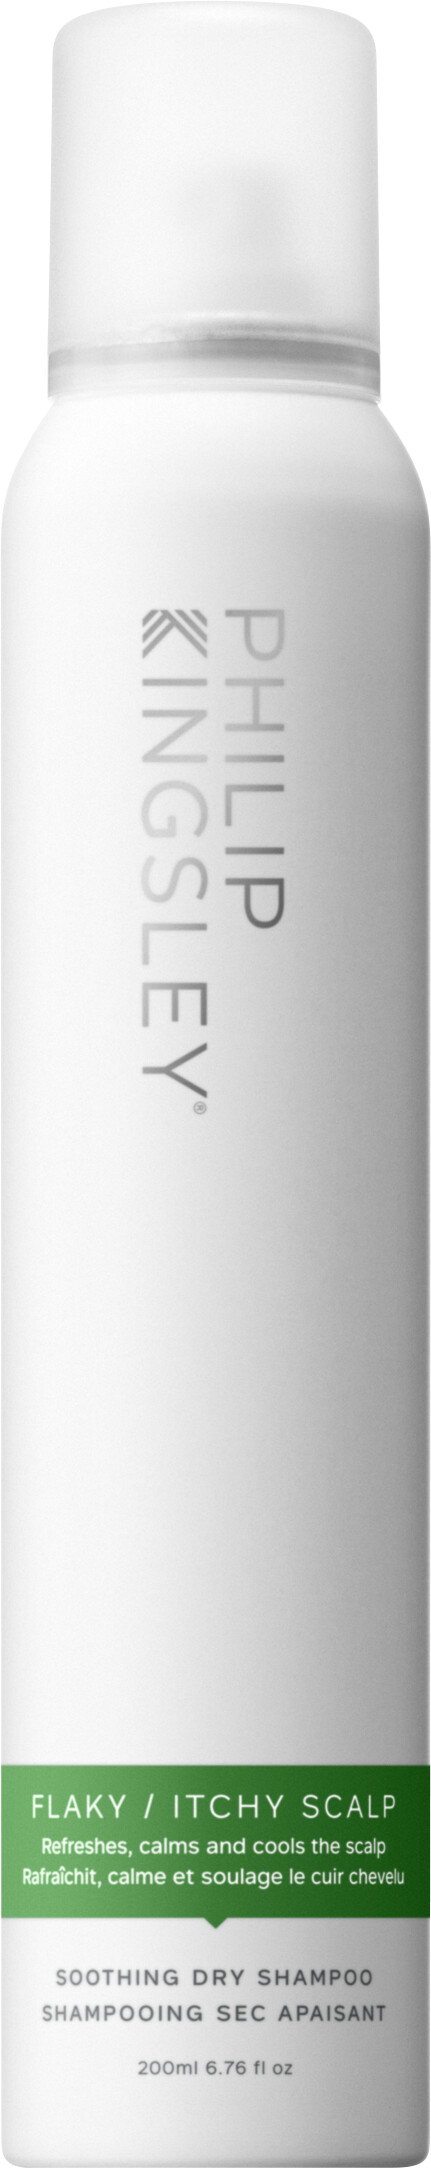 Philip Kingsley Flaky/Itchy Scalp Soothing Dry Shampoo 200ml